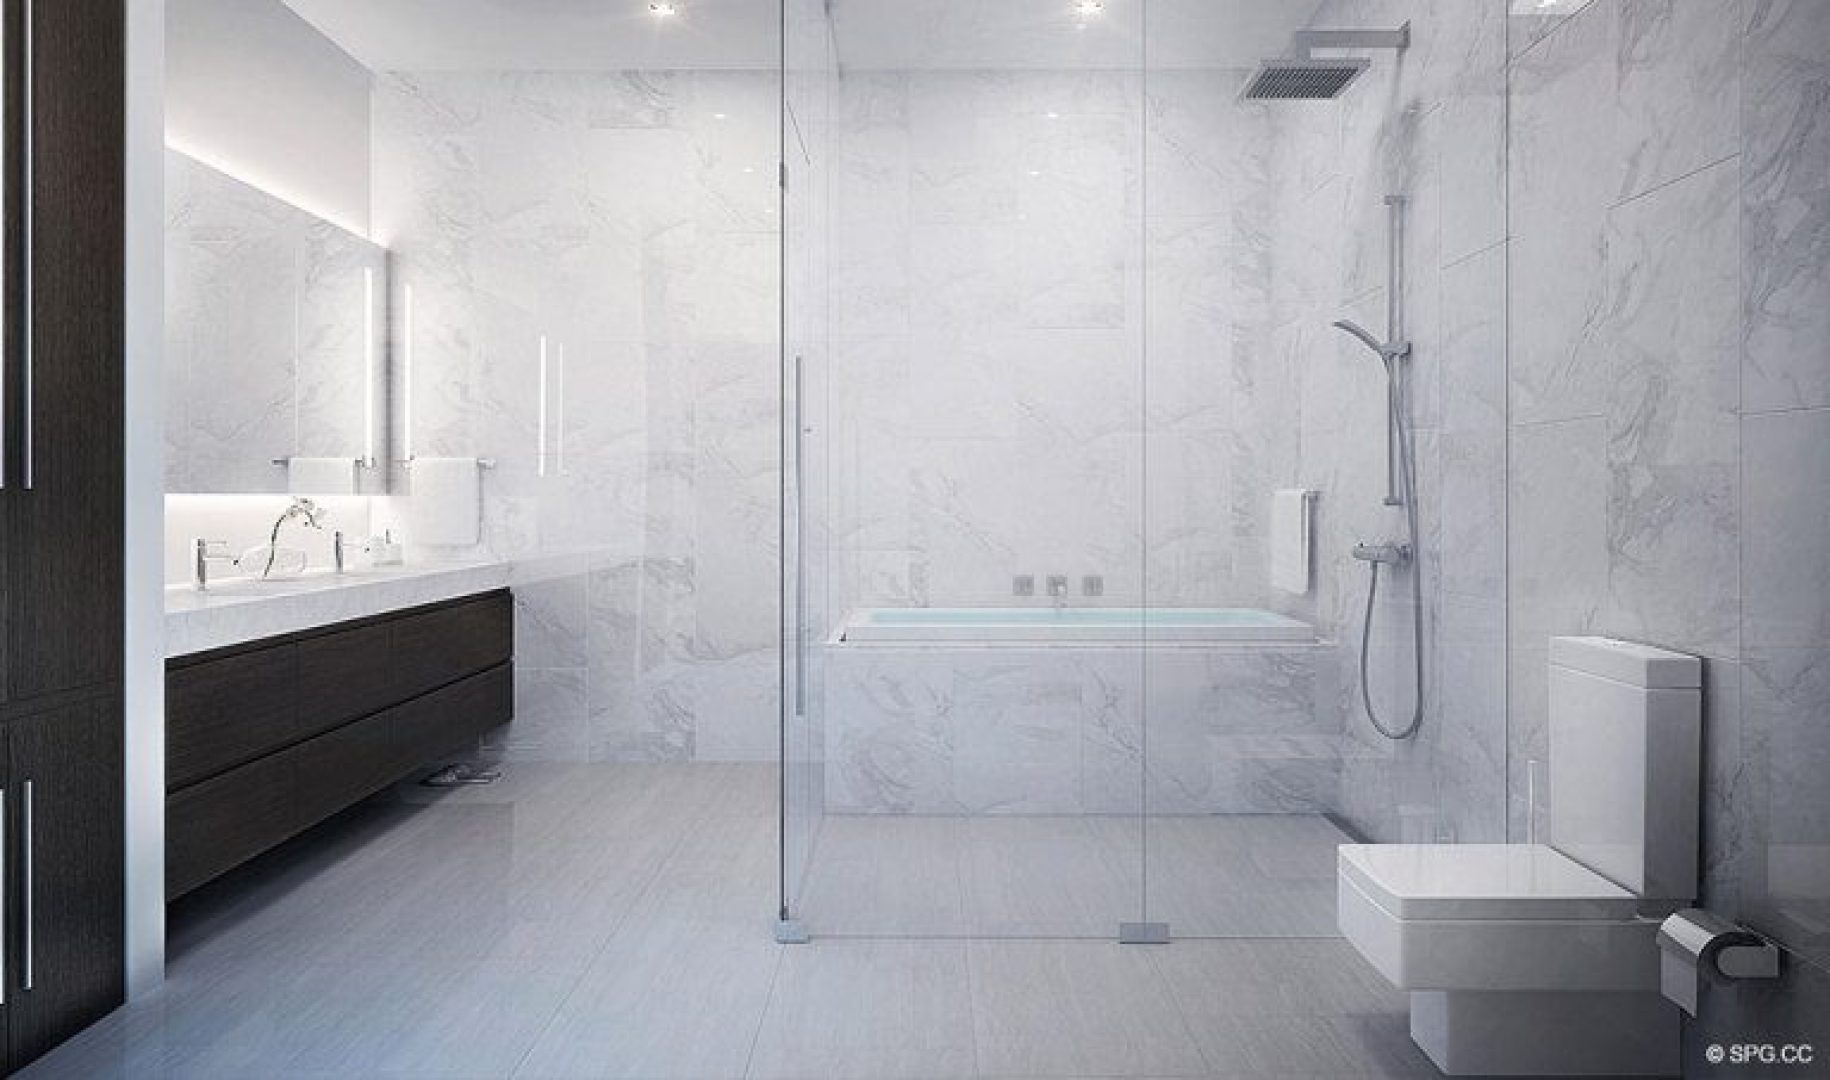 Bathroom Concept for Riva, Luxury Waterfront Condos in Fort Lauderdale, Florida 33304.